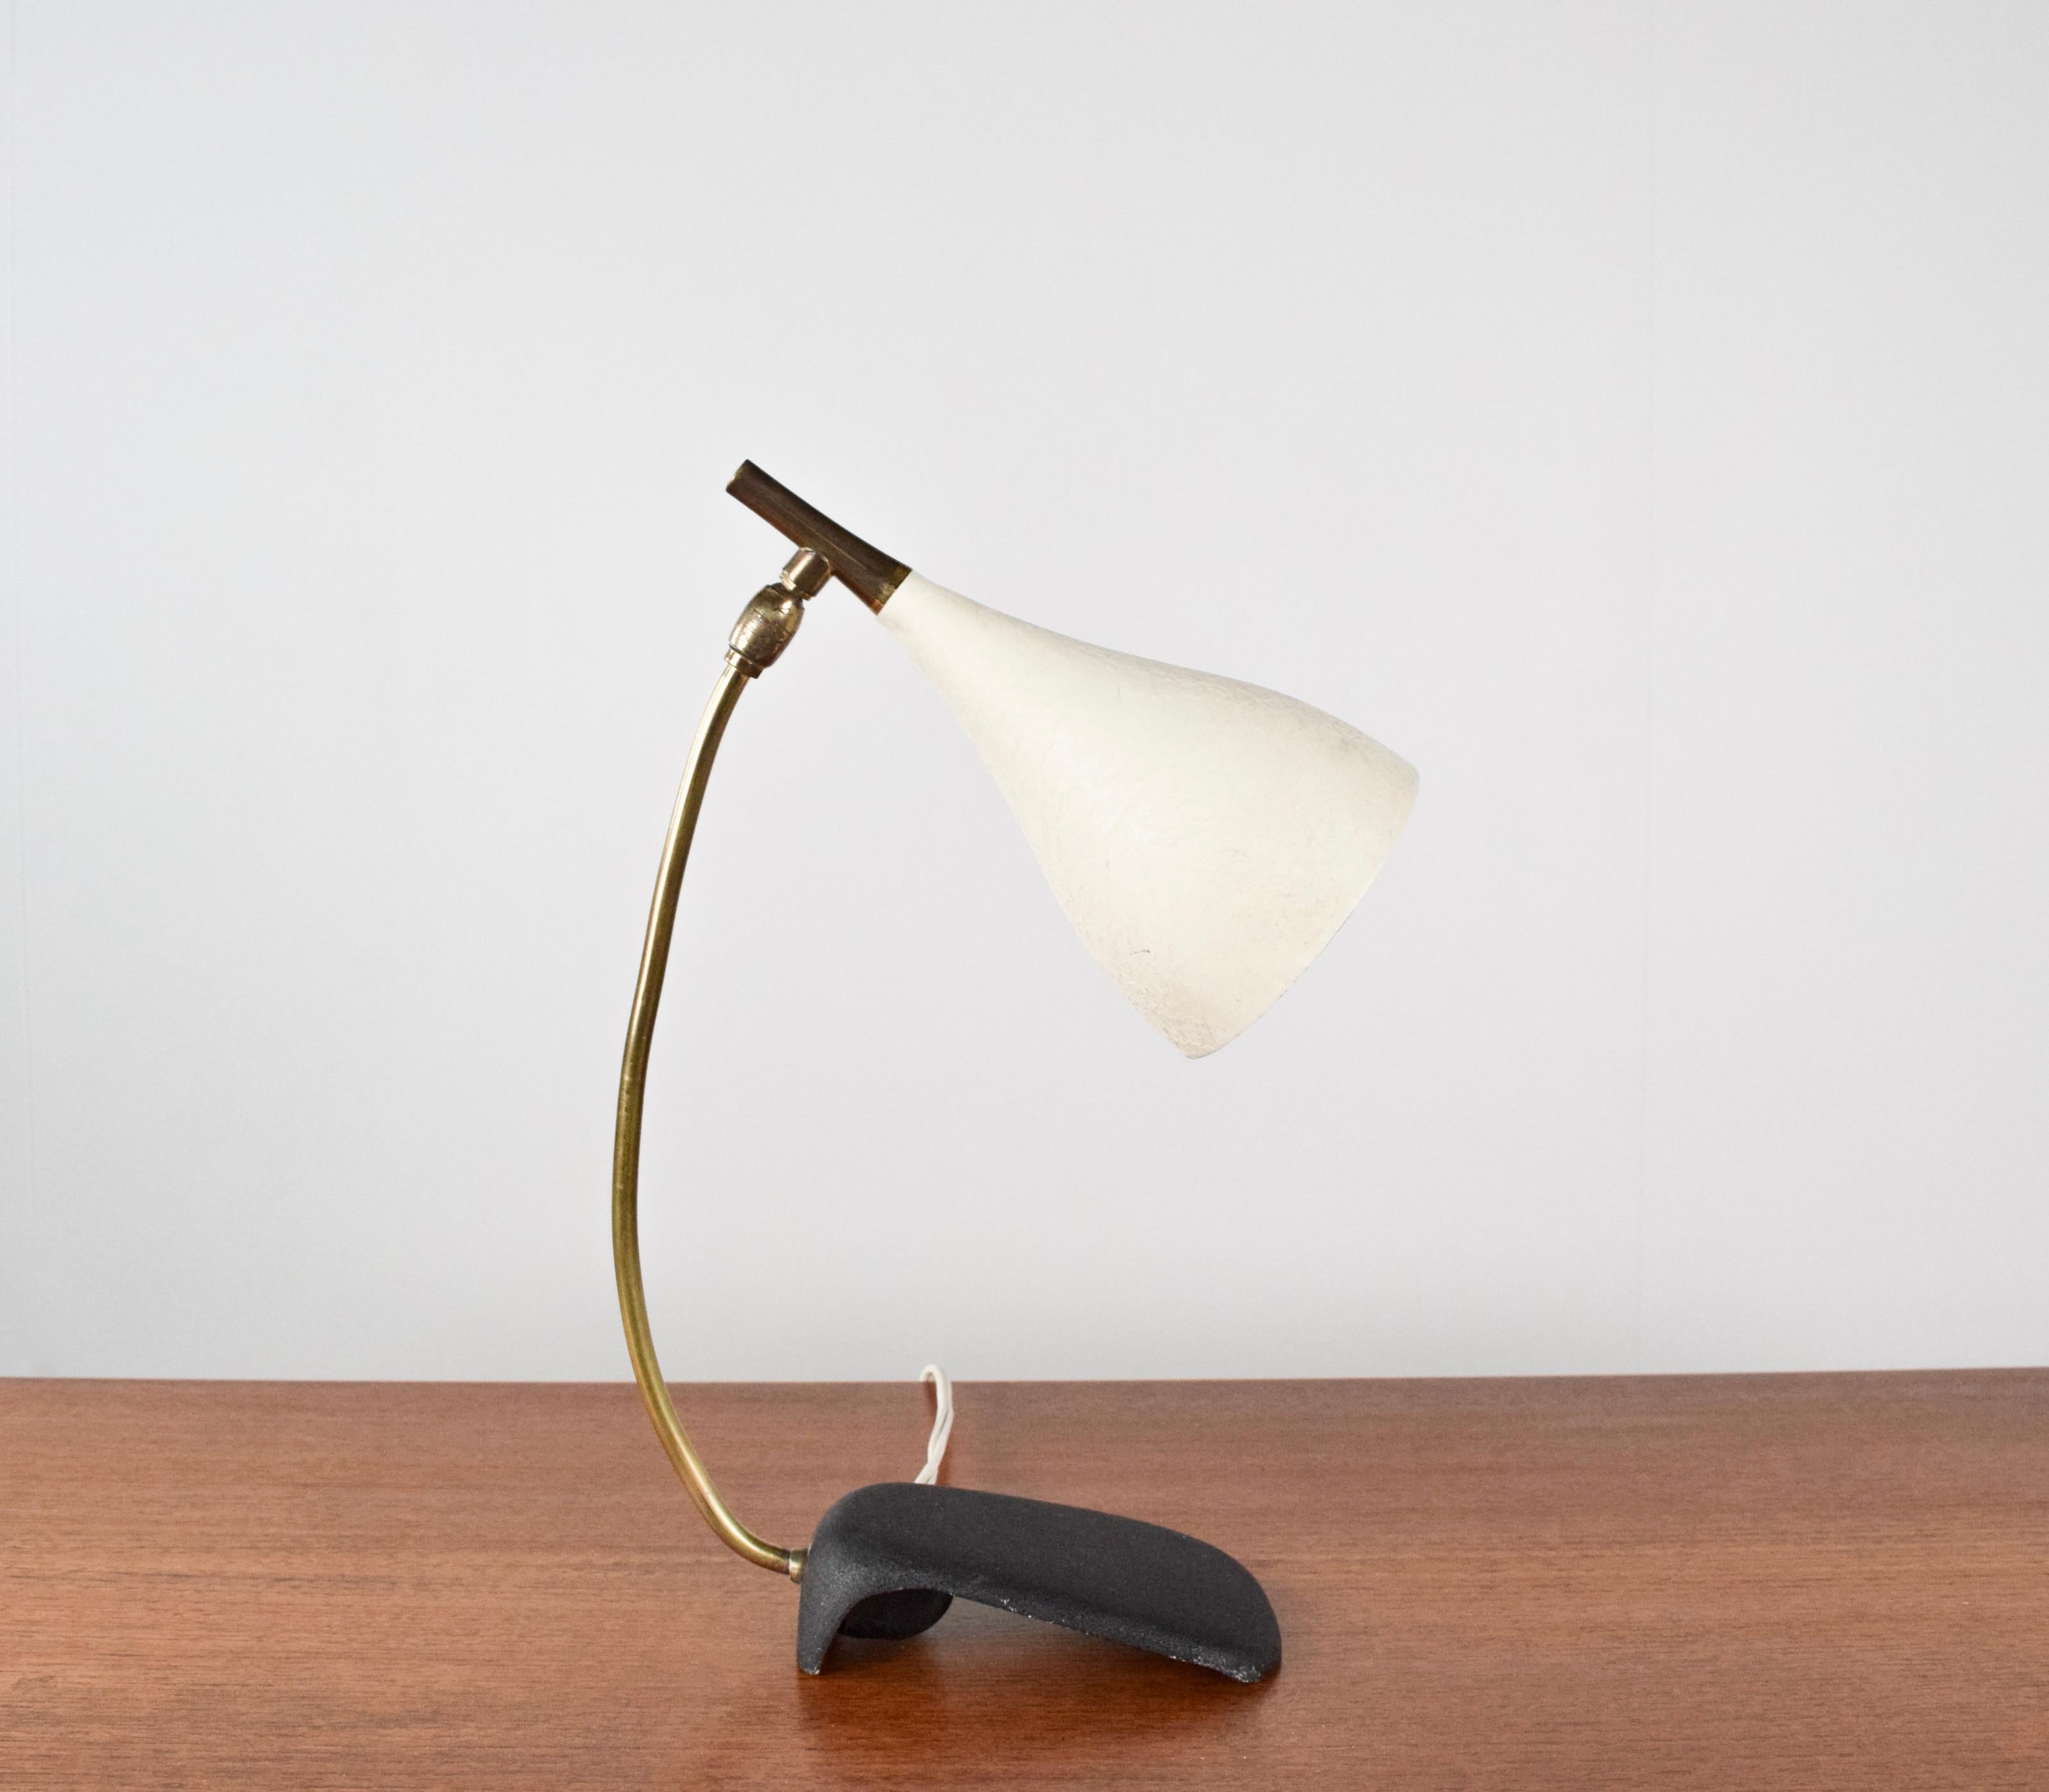 Minimalist Philips desk lamp by Gebrüder Cosack, Germany 1950's . This lamp has a hood of white lacquered aluminium, a cast iron foot and a curved brass base. This lamp is very stylish and functional and is a great addition to your interior. It is